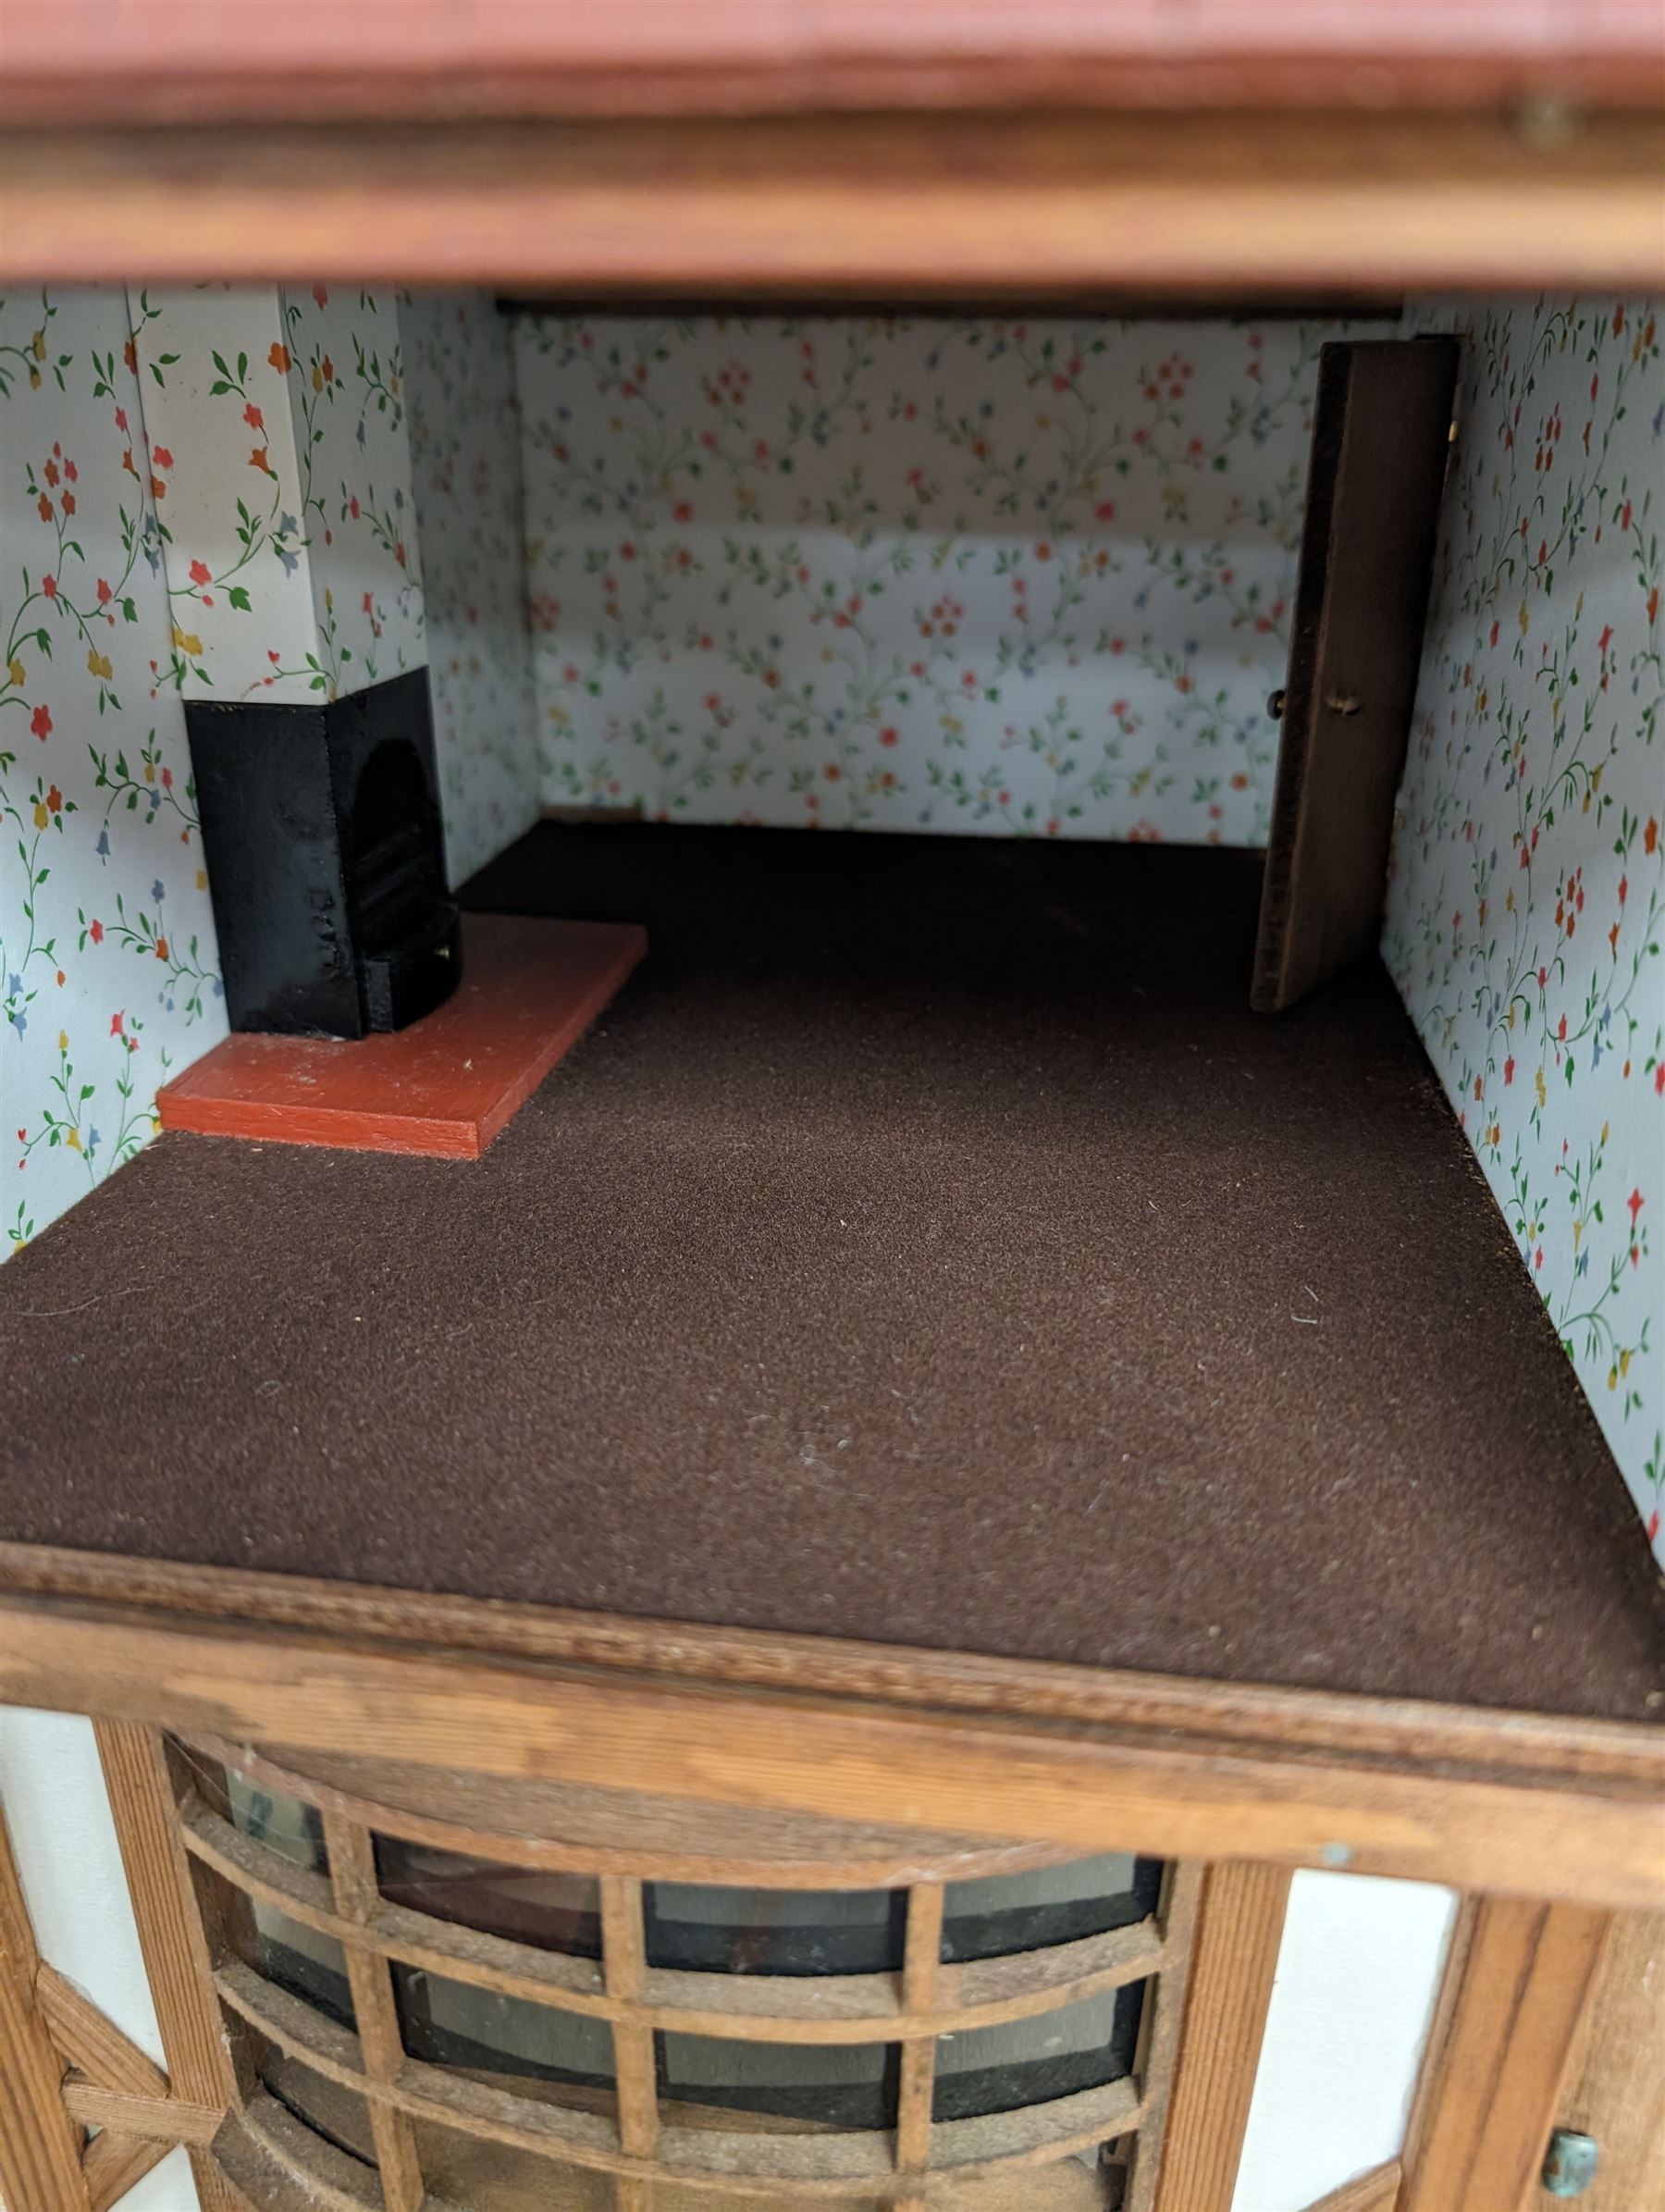 Two storey wooden dolls house with sliding panels - Image 5 of 7